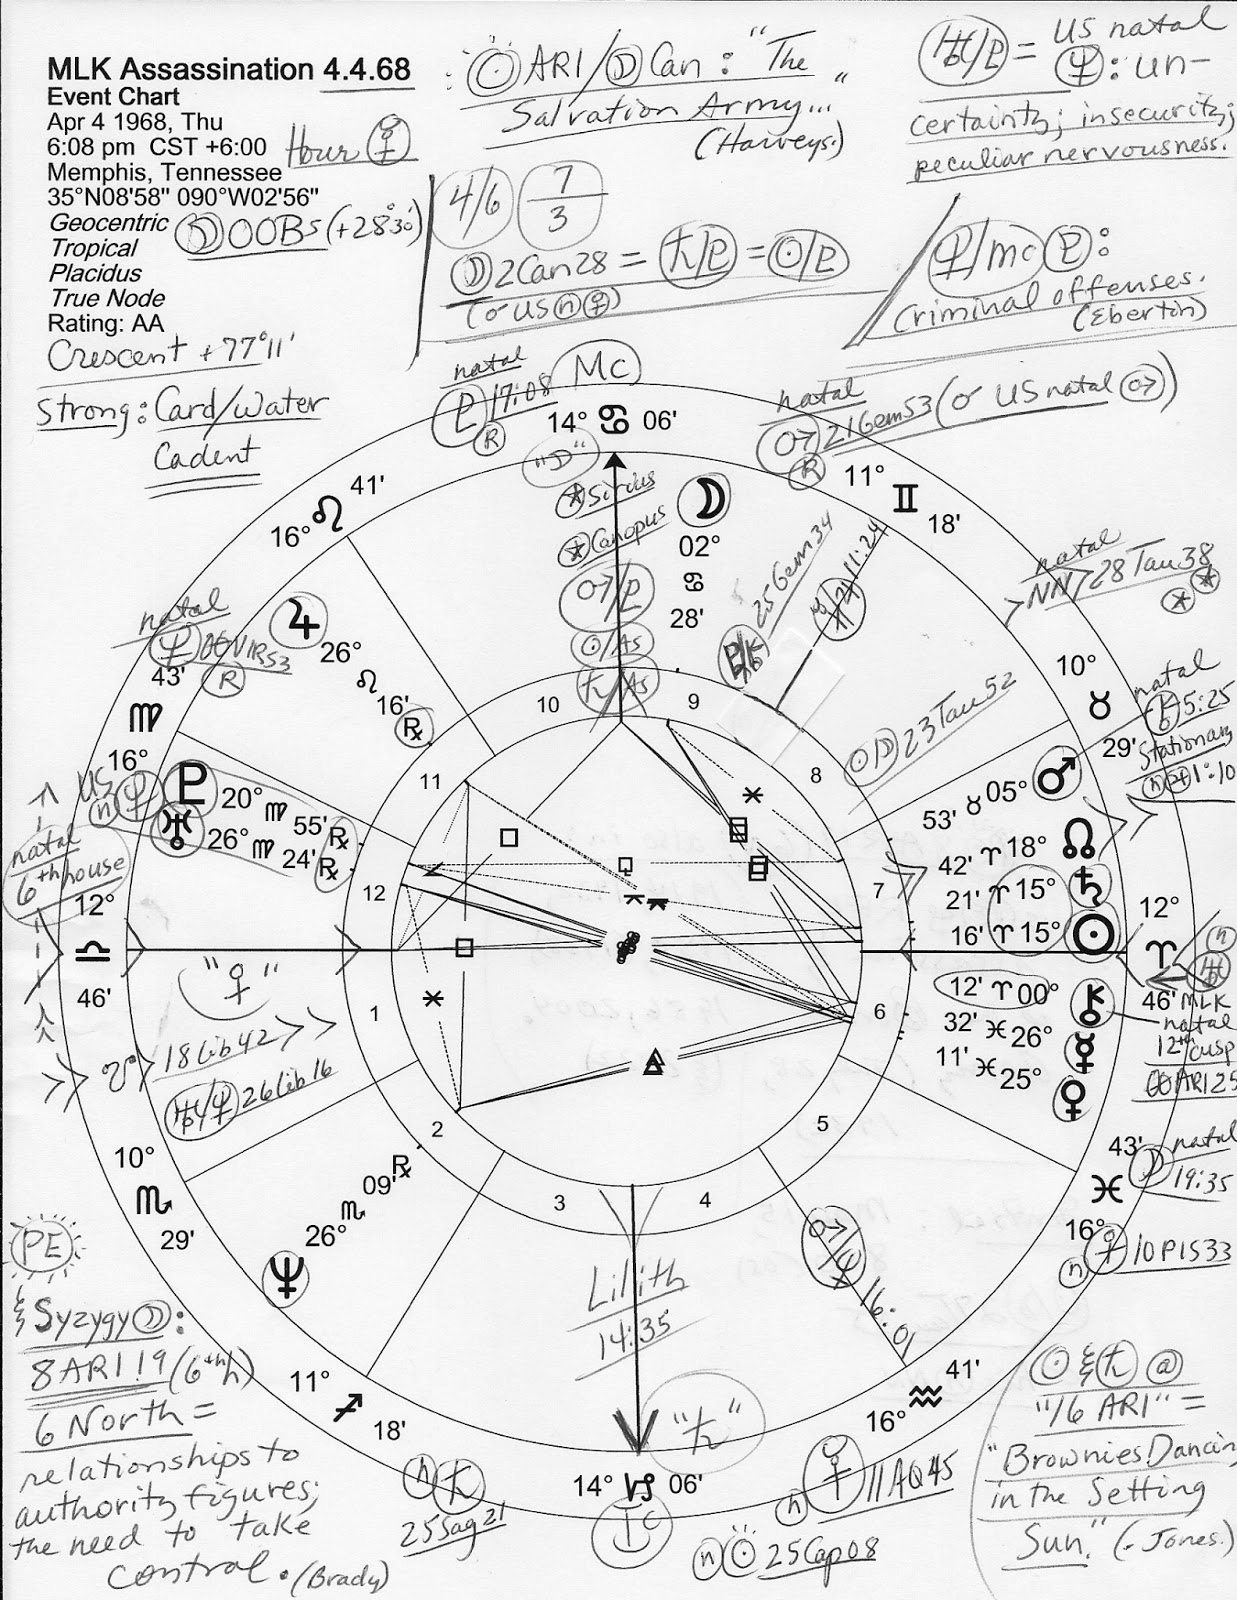 Martin Luther King Birth Chart